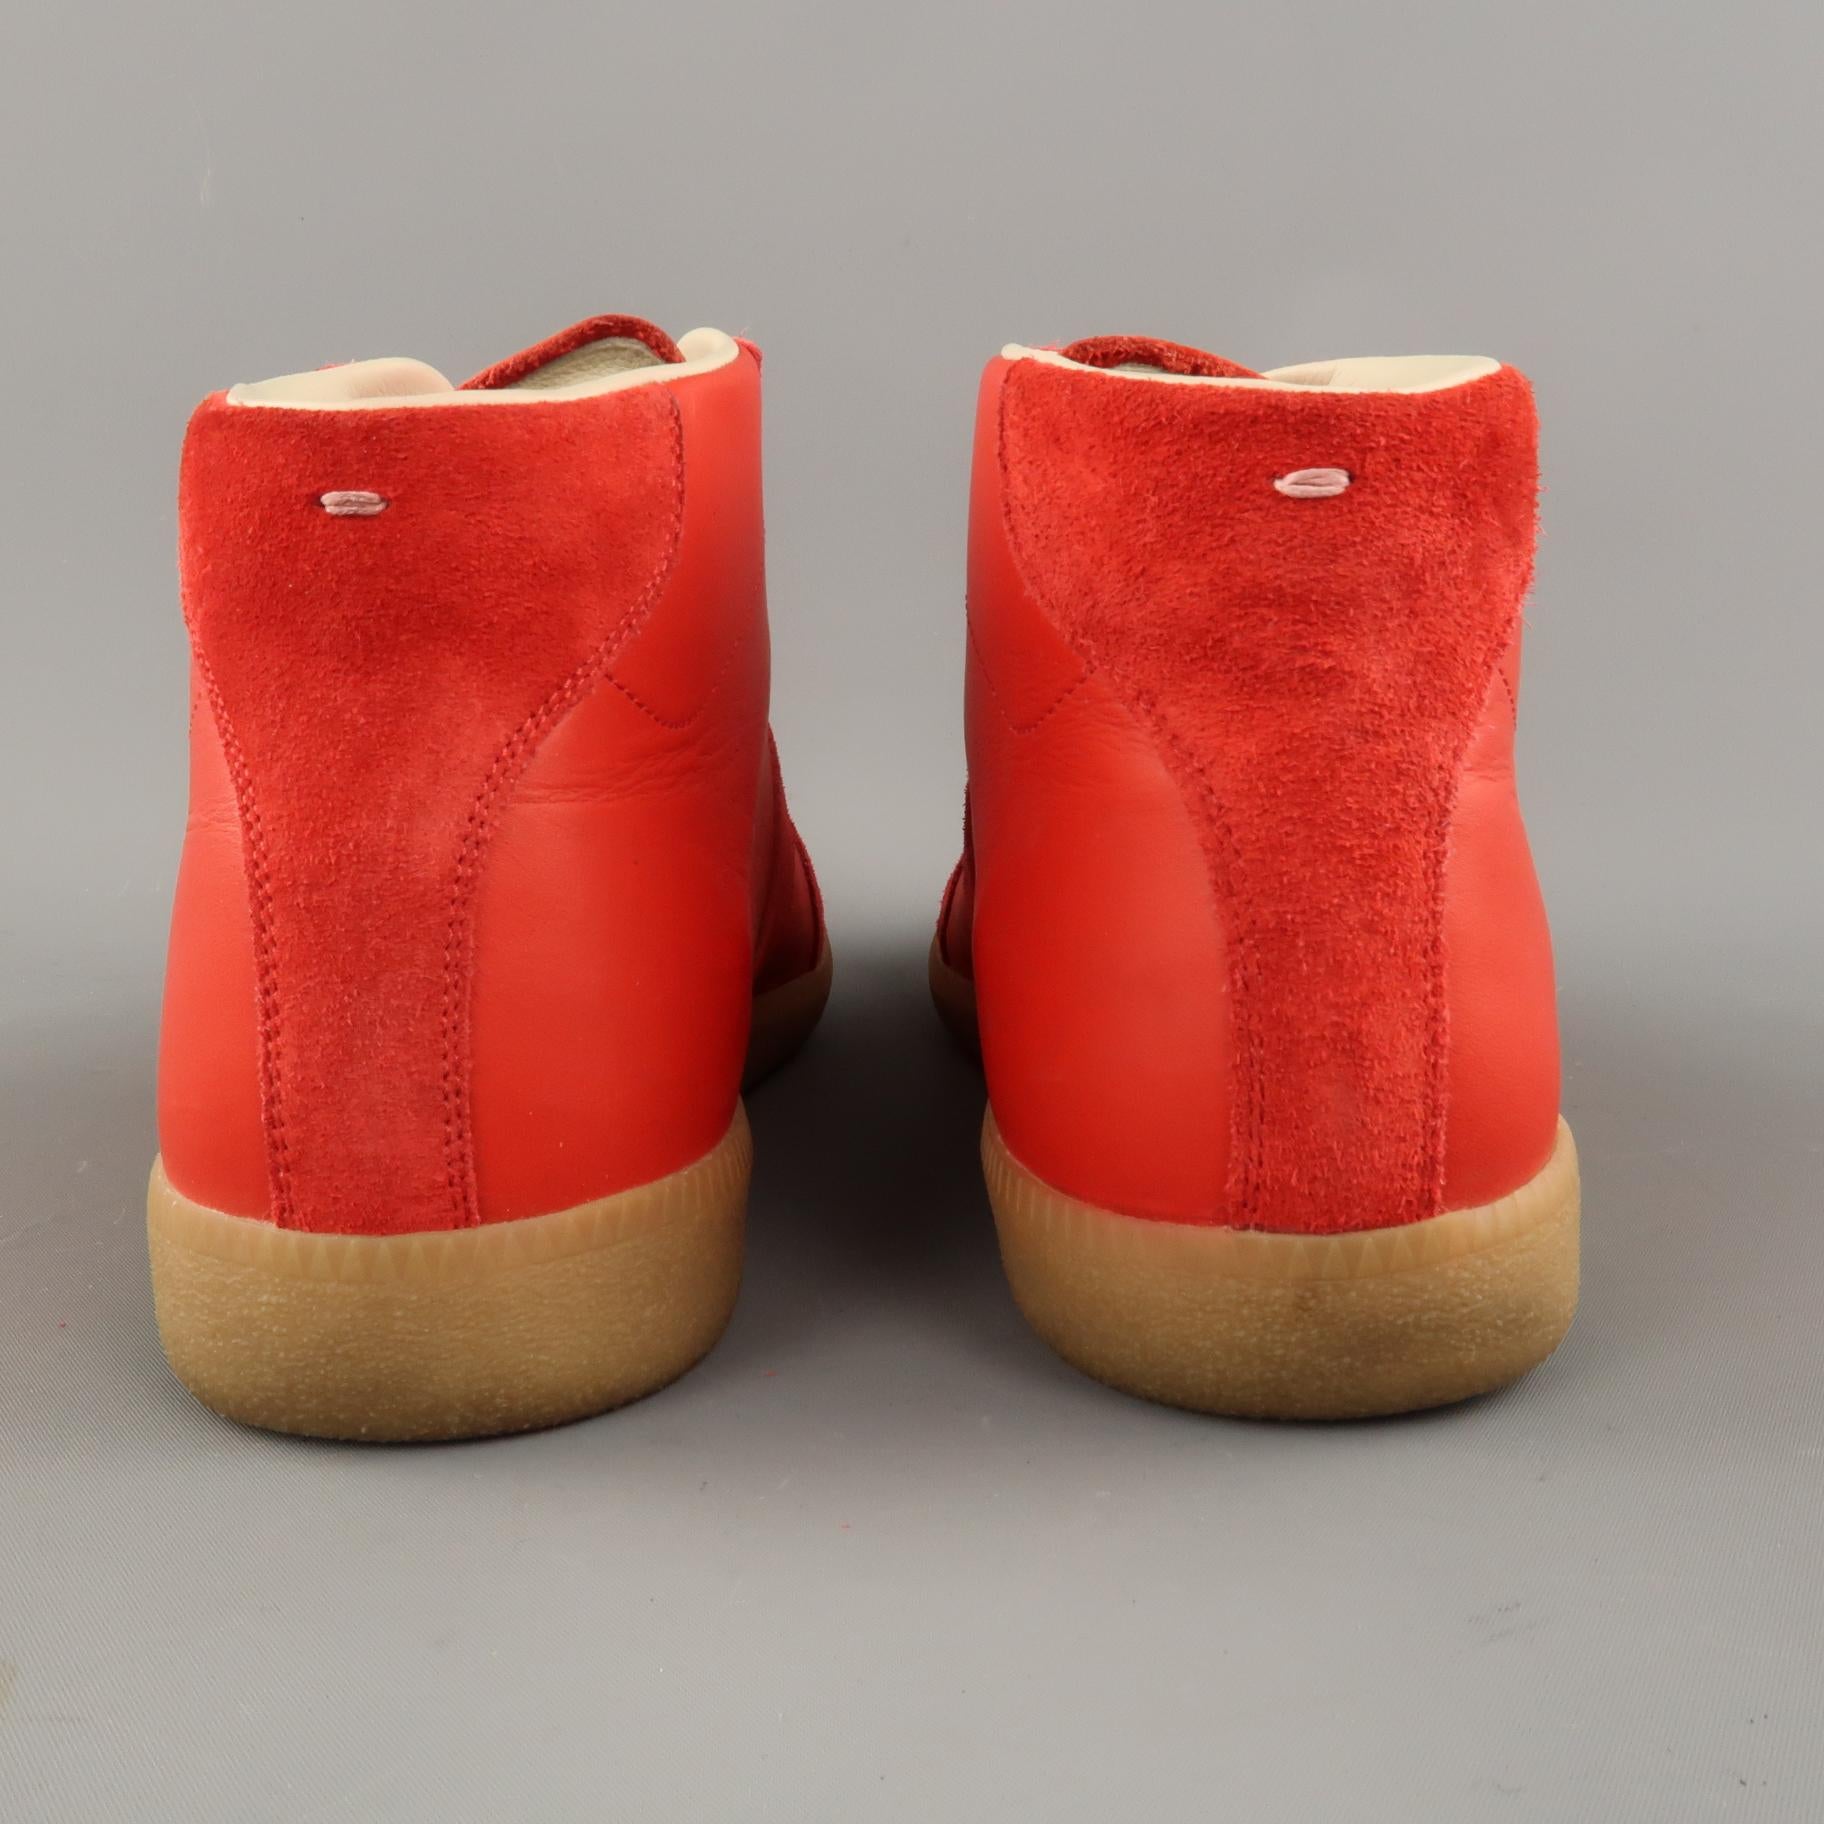 Men's MAISON MARGIELA Size 10.5 Red Leather & Suede REPLICA High Top Sneakers